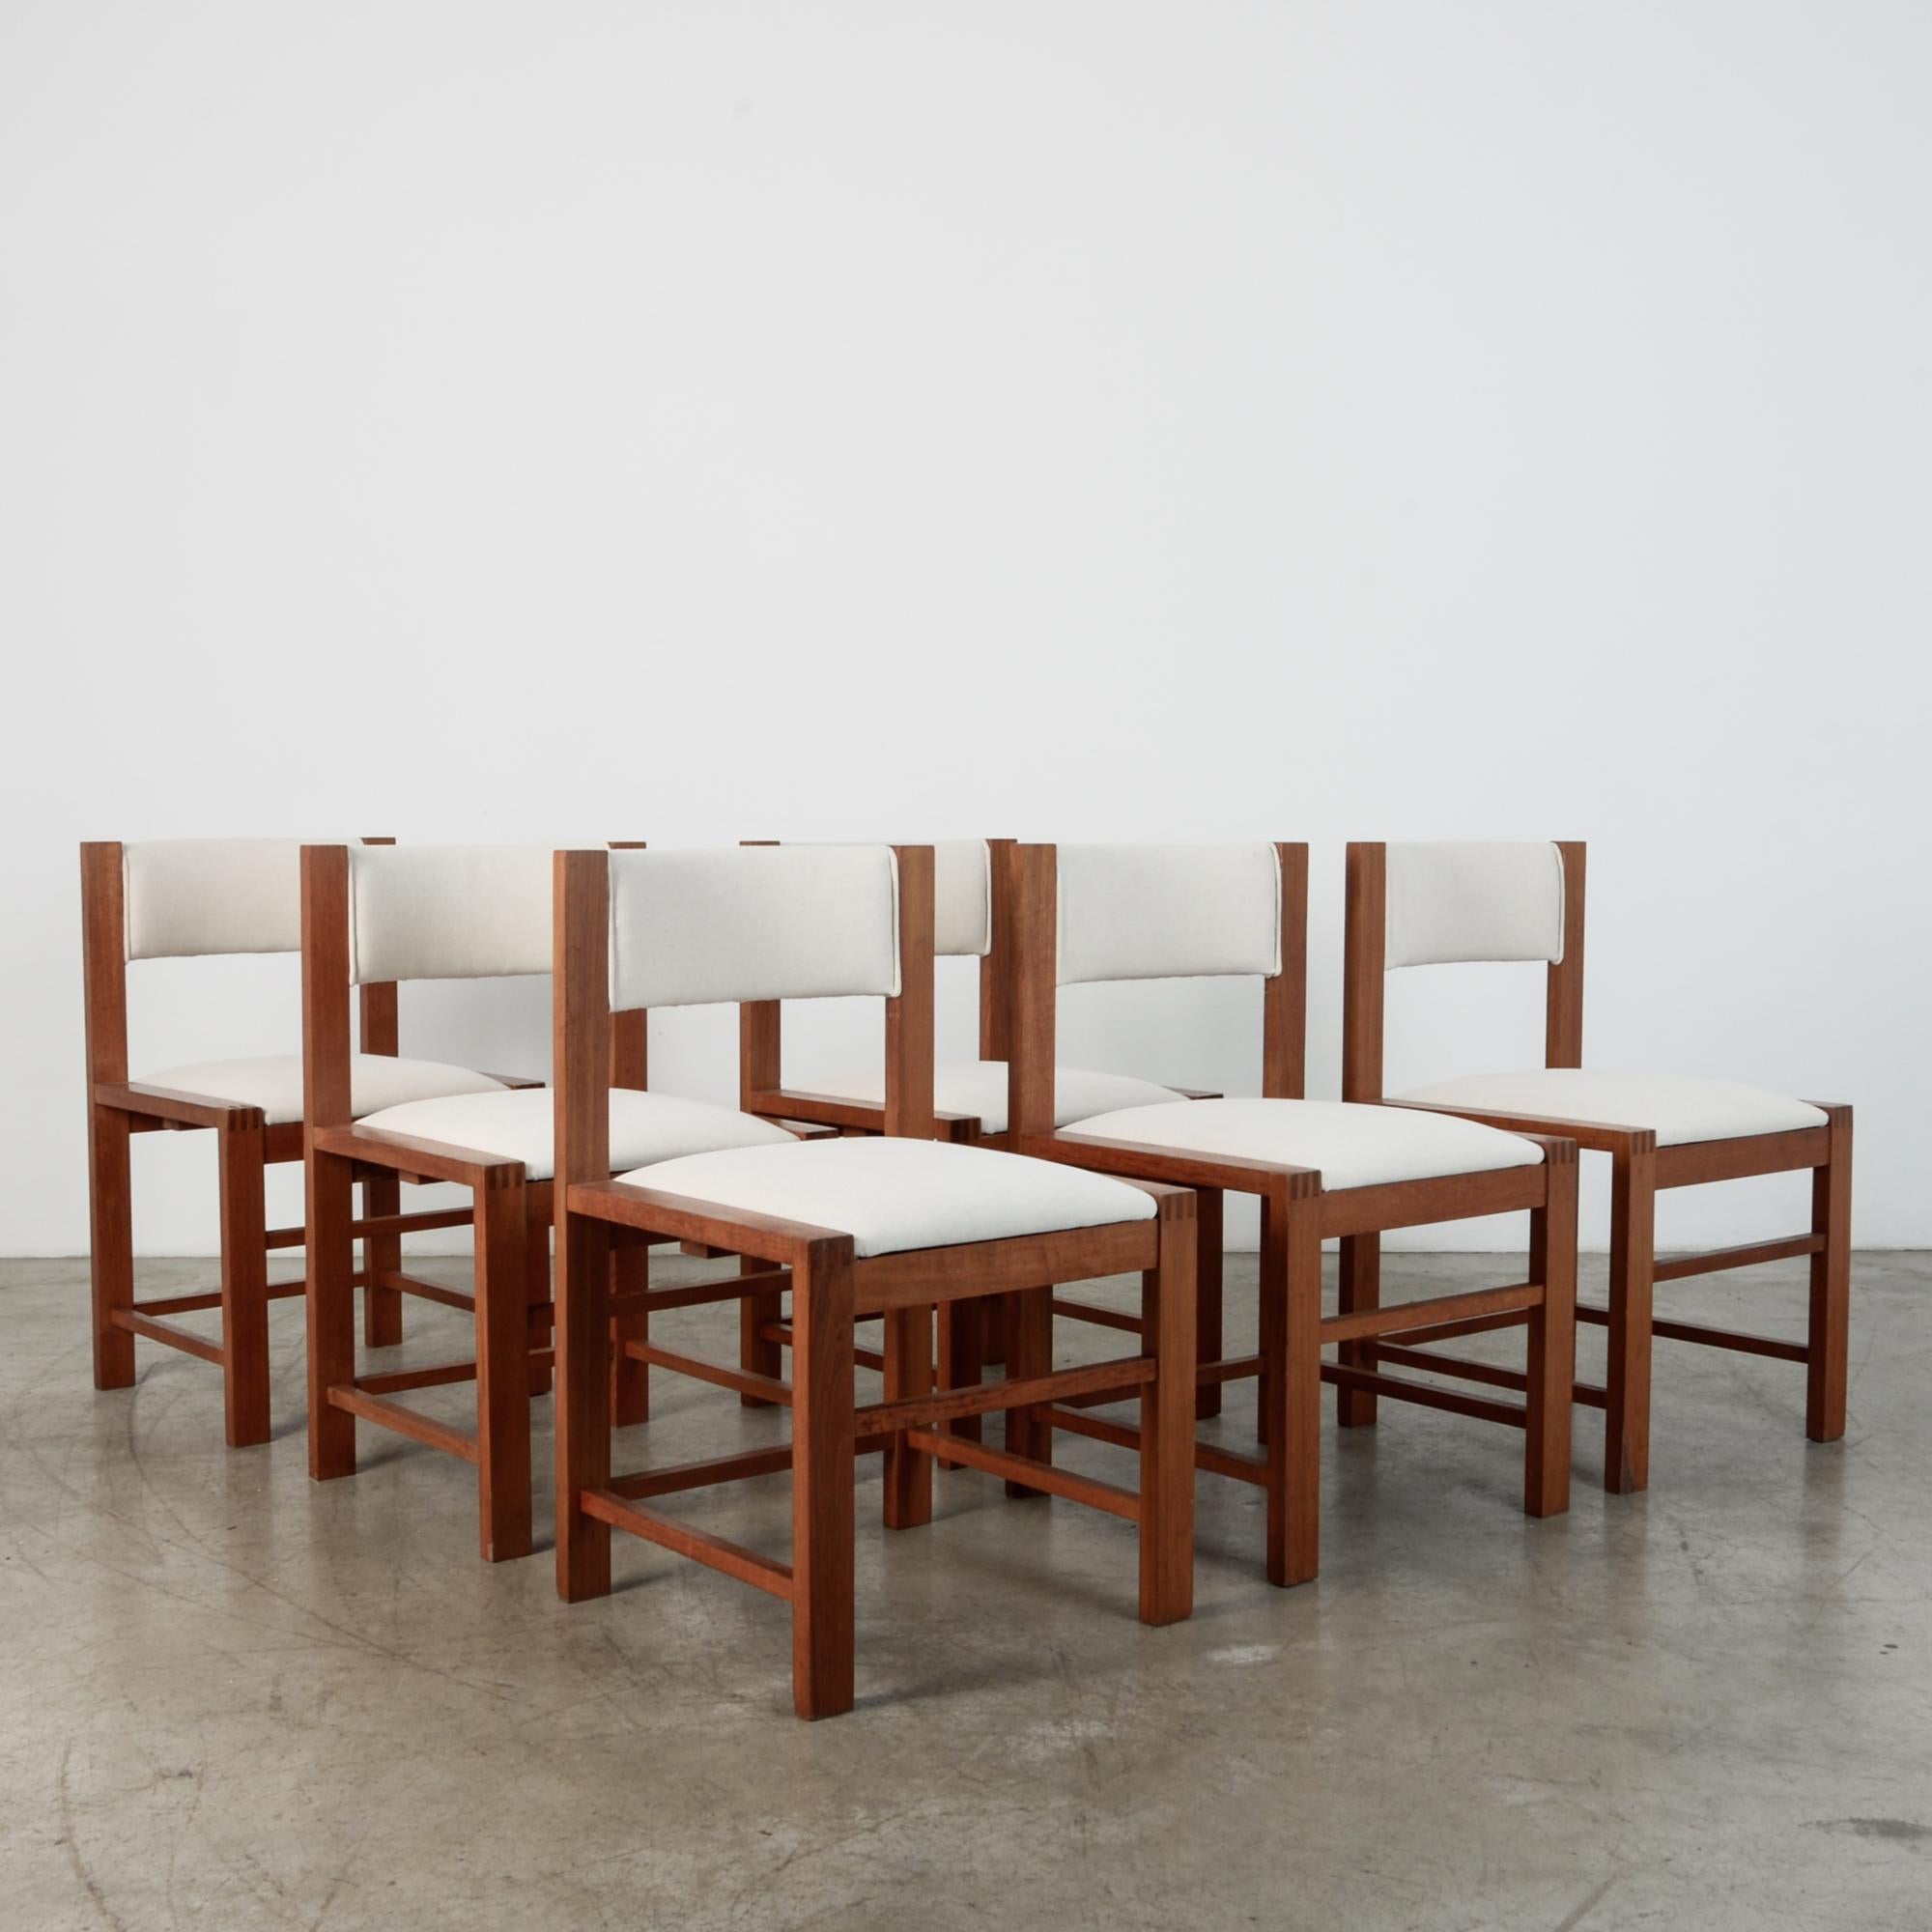 These minimal chairs are a distinctive Scandinavian design from circa 1970. With craftsman construction this sleek set is built to last in teak. The white fabric is a modern update, re- upholstered with a cotton-linen blend.